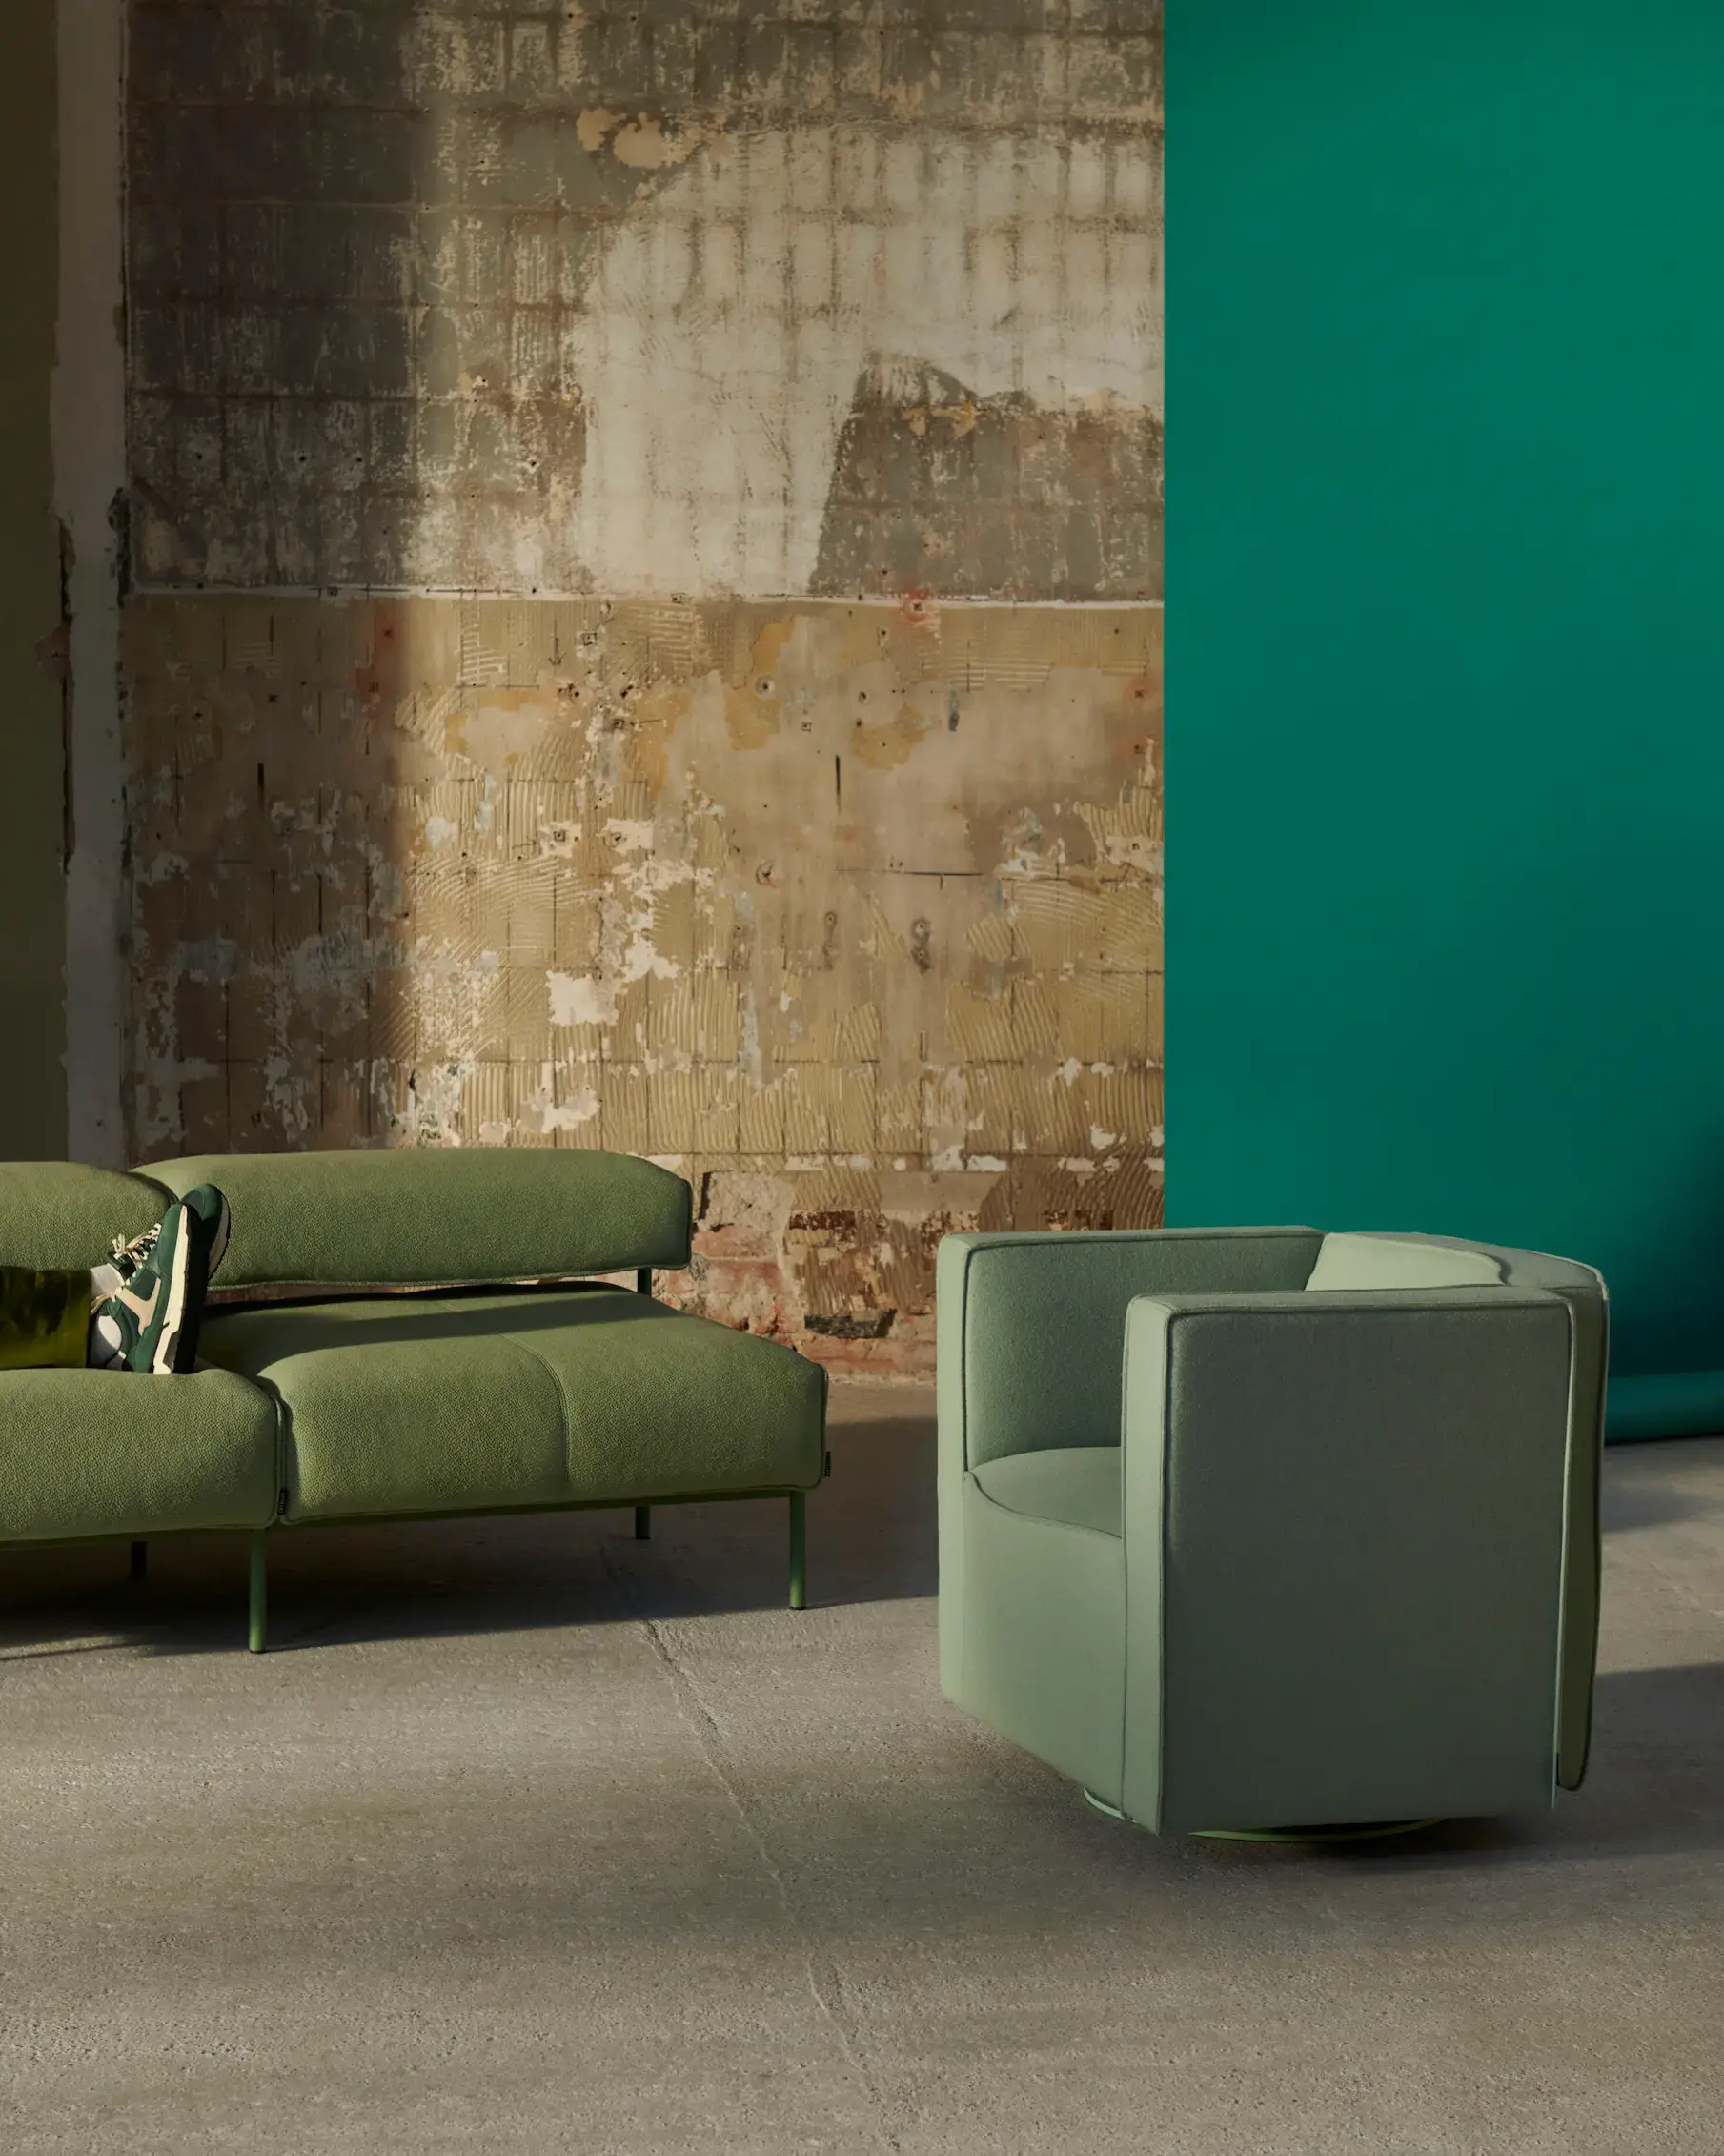 Lucy_sofa system-Lucy Kurrein_Pauline-easy chair_Pauline Deltour_Offecct